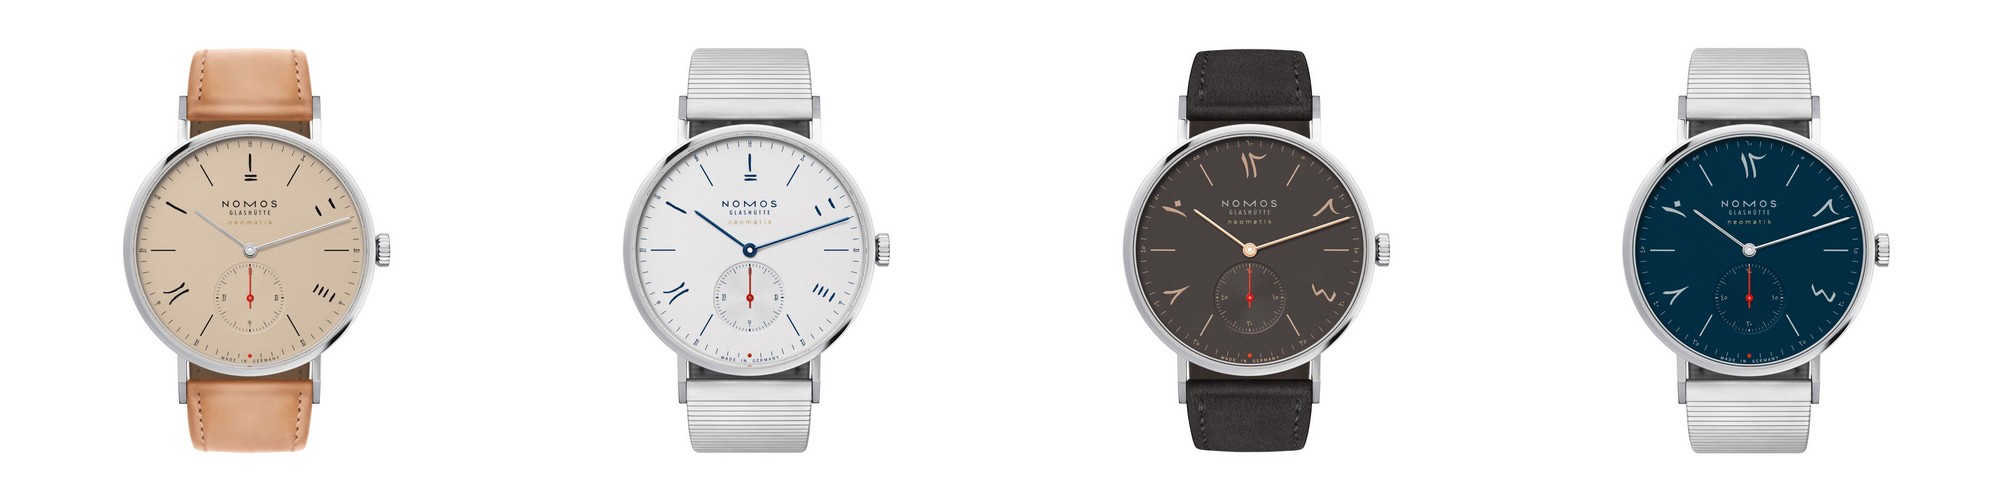 12 Minimalist Watches: A Fine Time for Simplicity - Design Milk